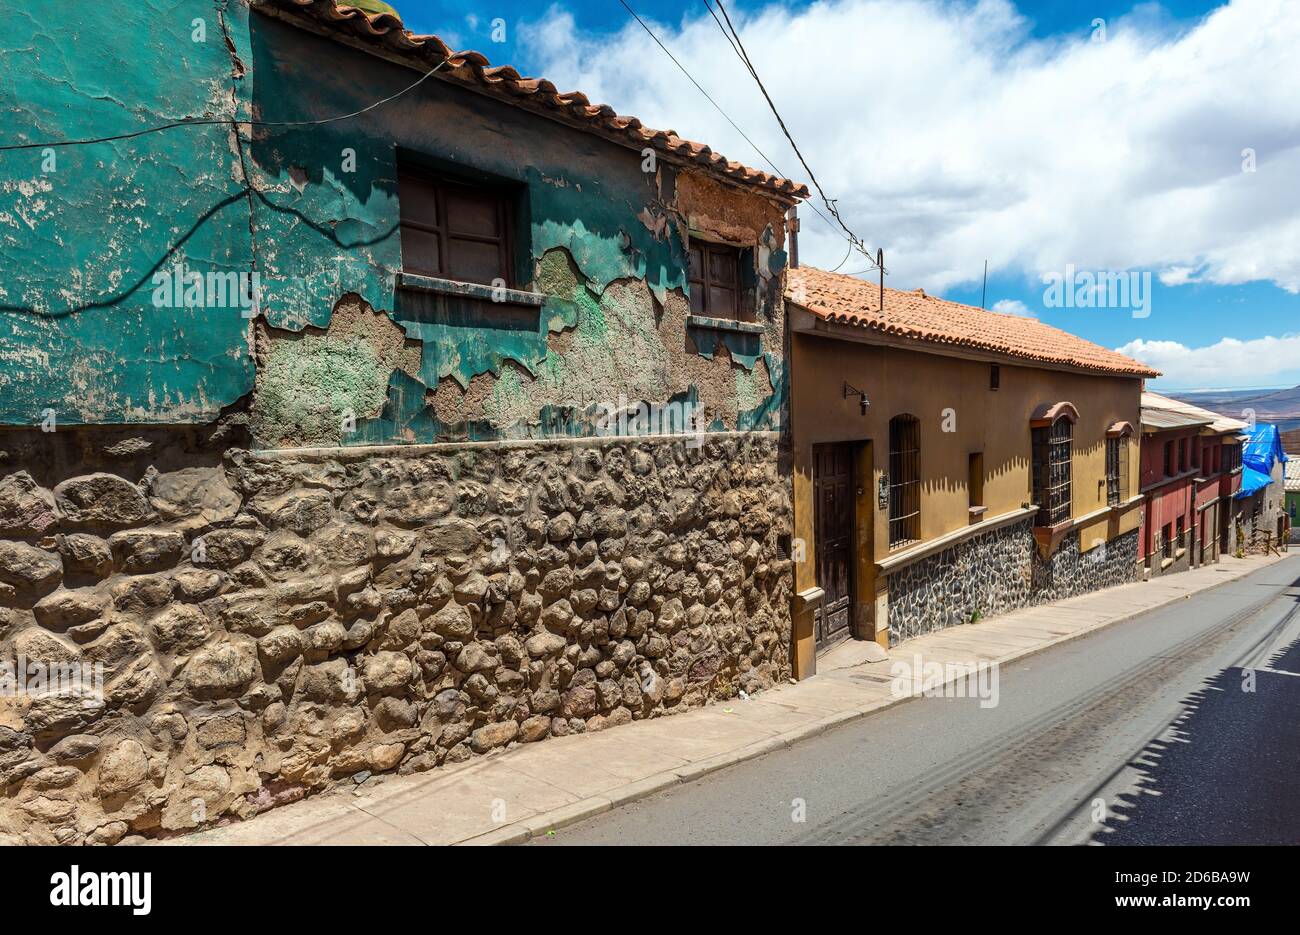 Street with colonial style facade architecture, Potosi, Bolivia. Stock Photo